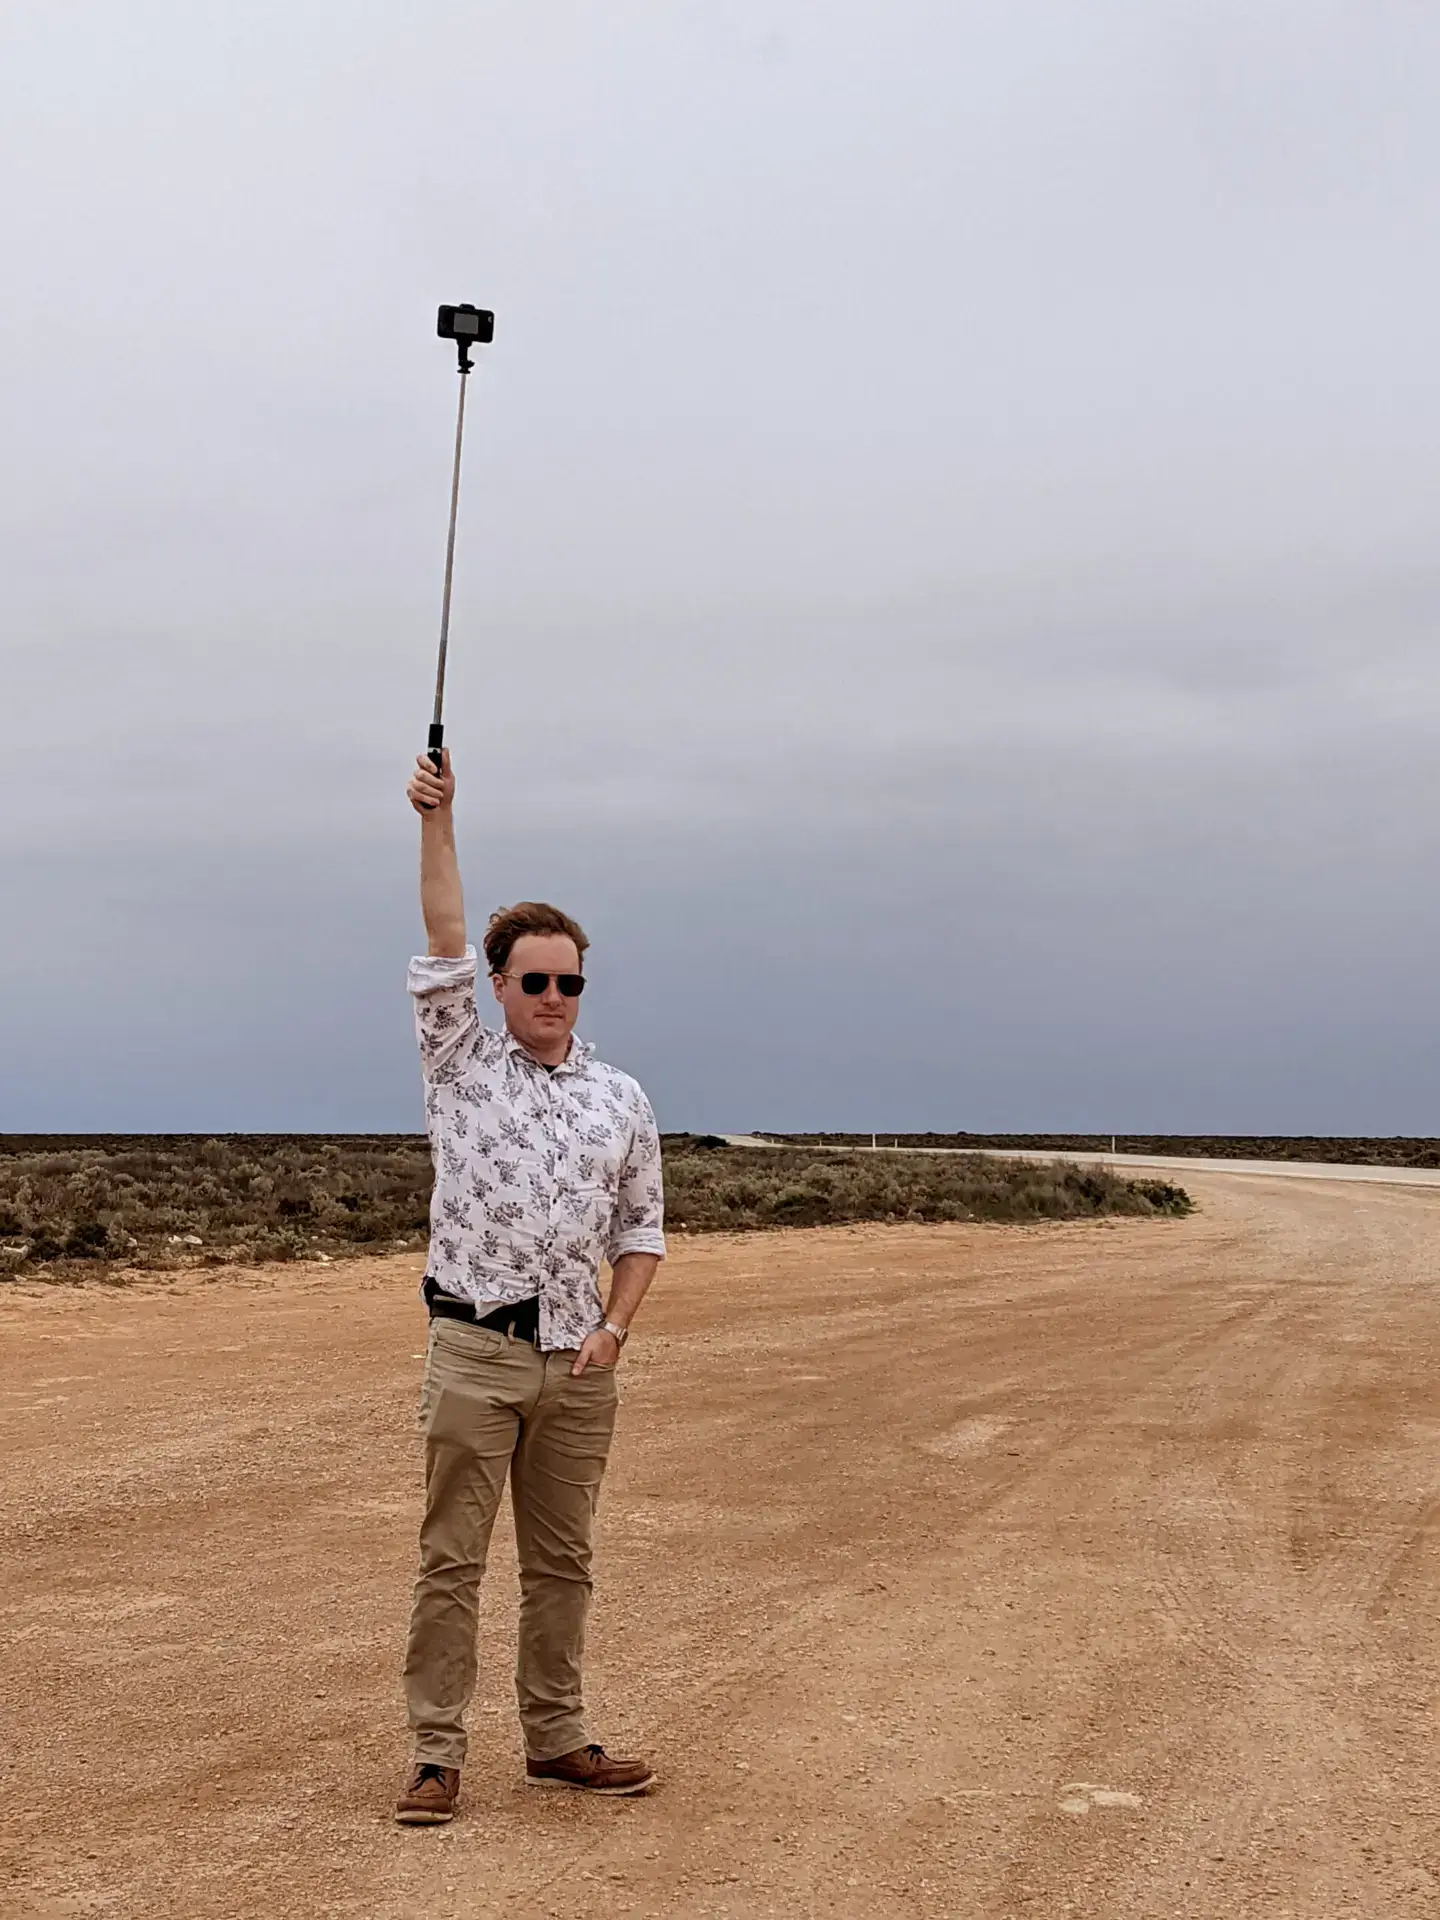 Getting a cellular internet dongle up high on the Nullarbor Plain can help you get a signal far from the sparsely-located towers. <em>Lewin Day</em>